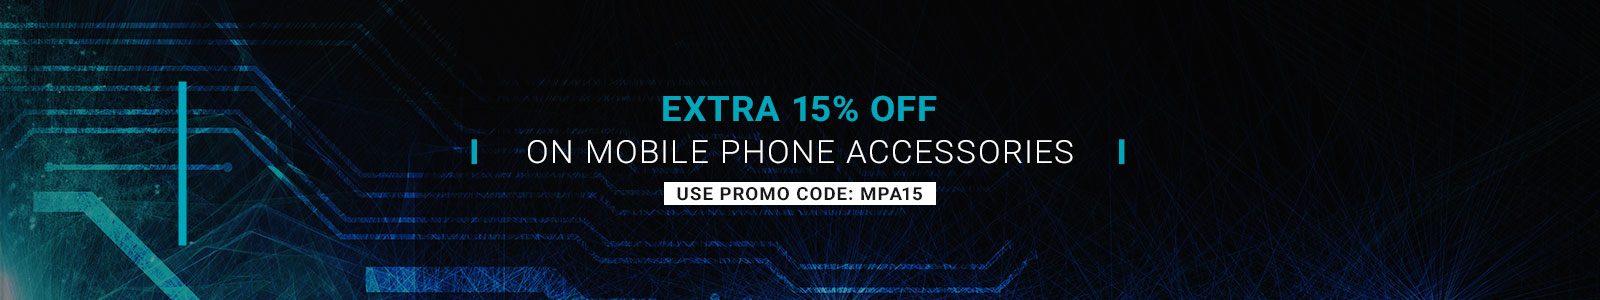 Extra 15% off on Mobile Phone Accessories
Use promo code: MPA15
Shop Now